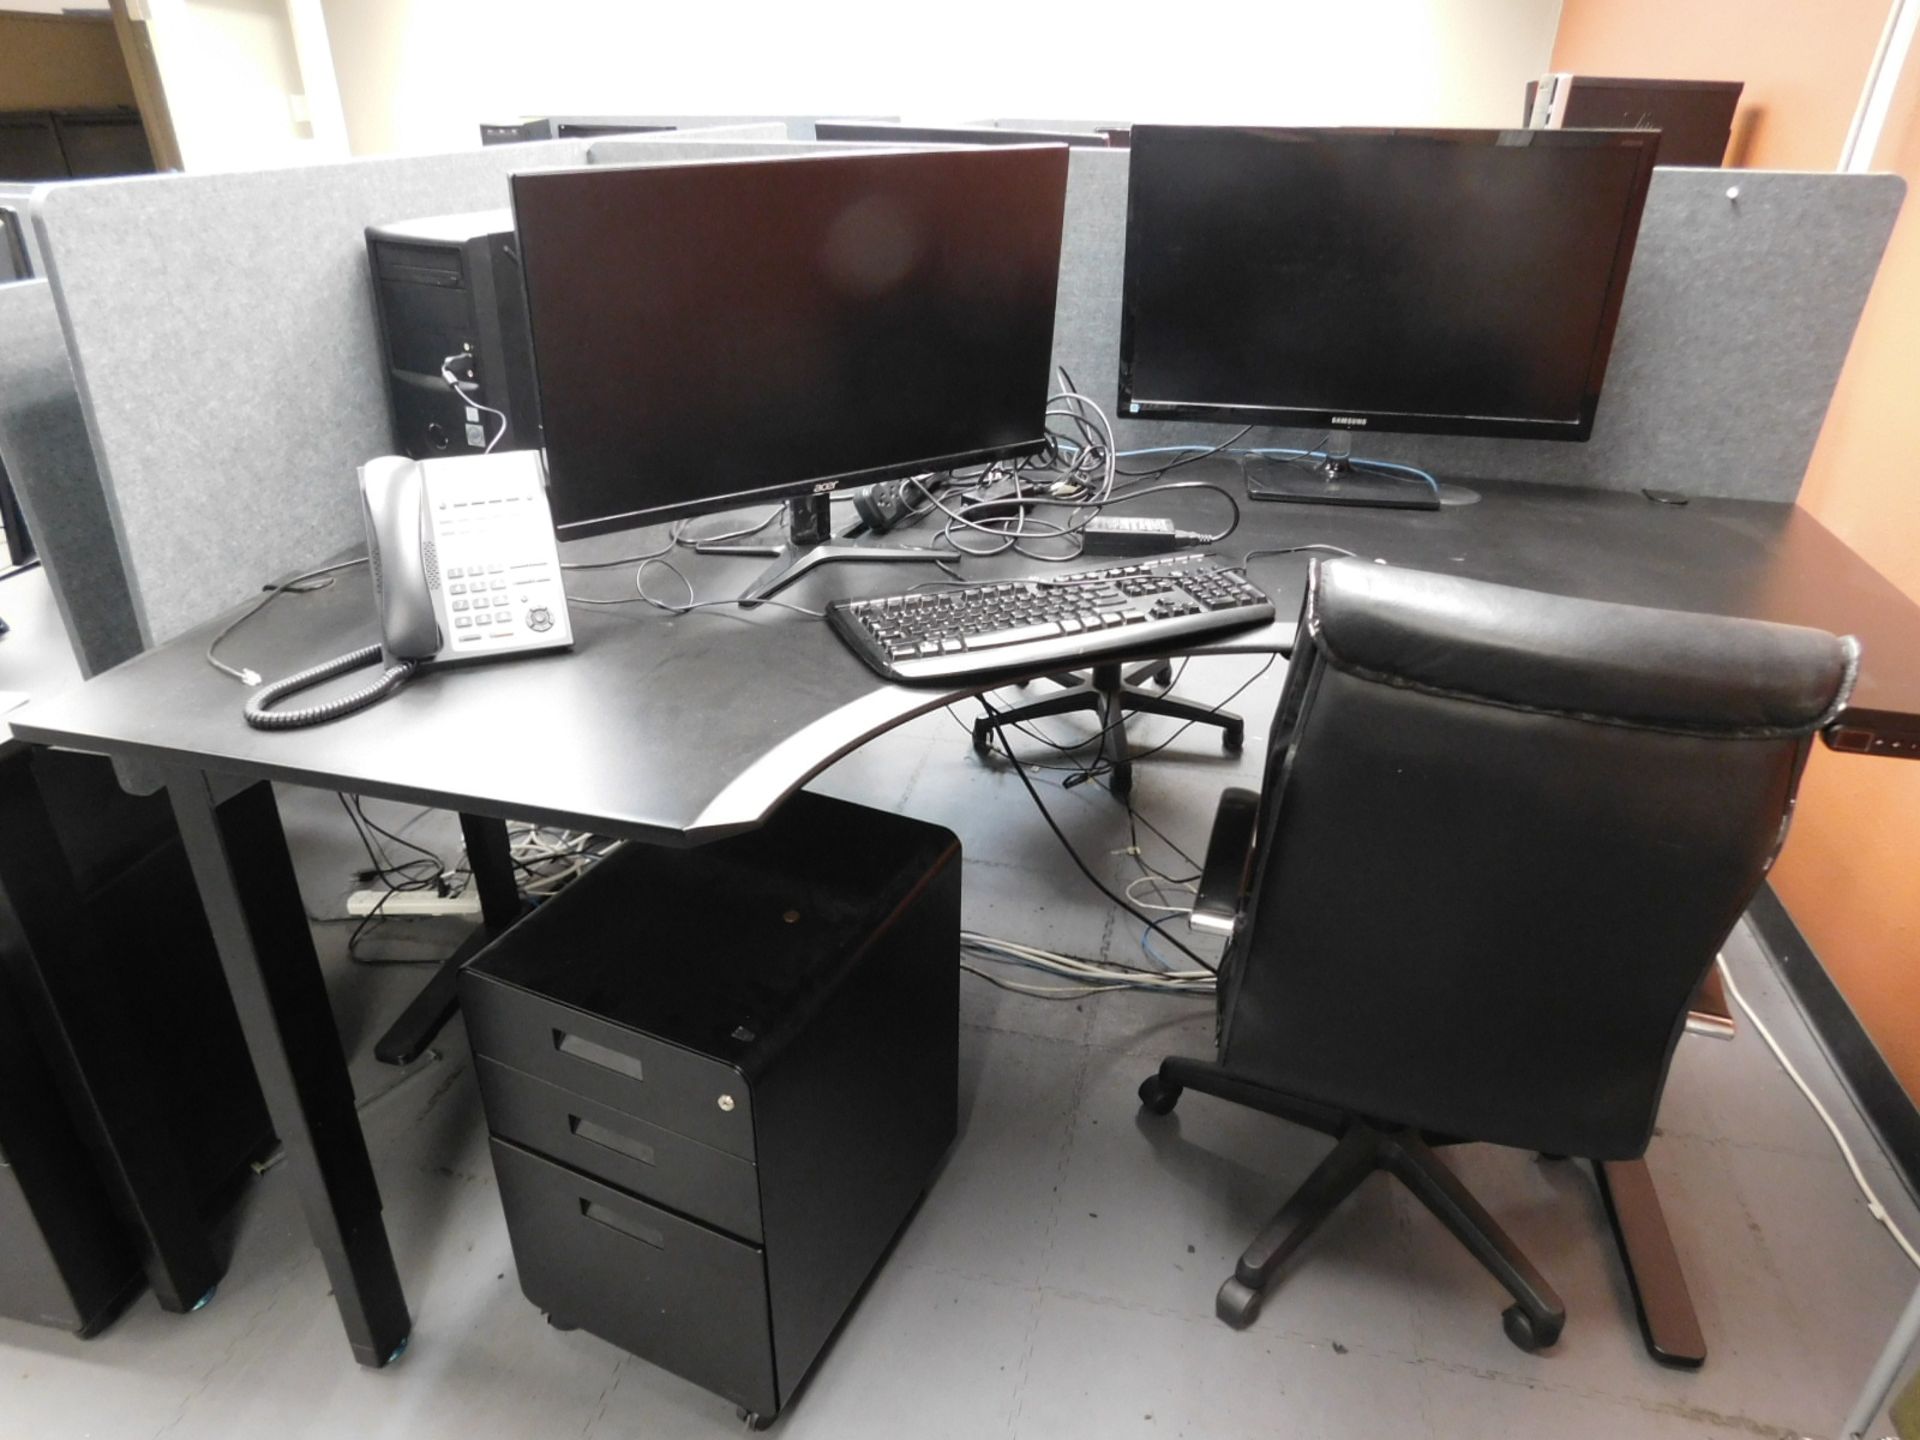 LOT - (2) UPLIFT DESK UNITS (COMPUTERS NOT INCLUDED)